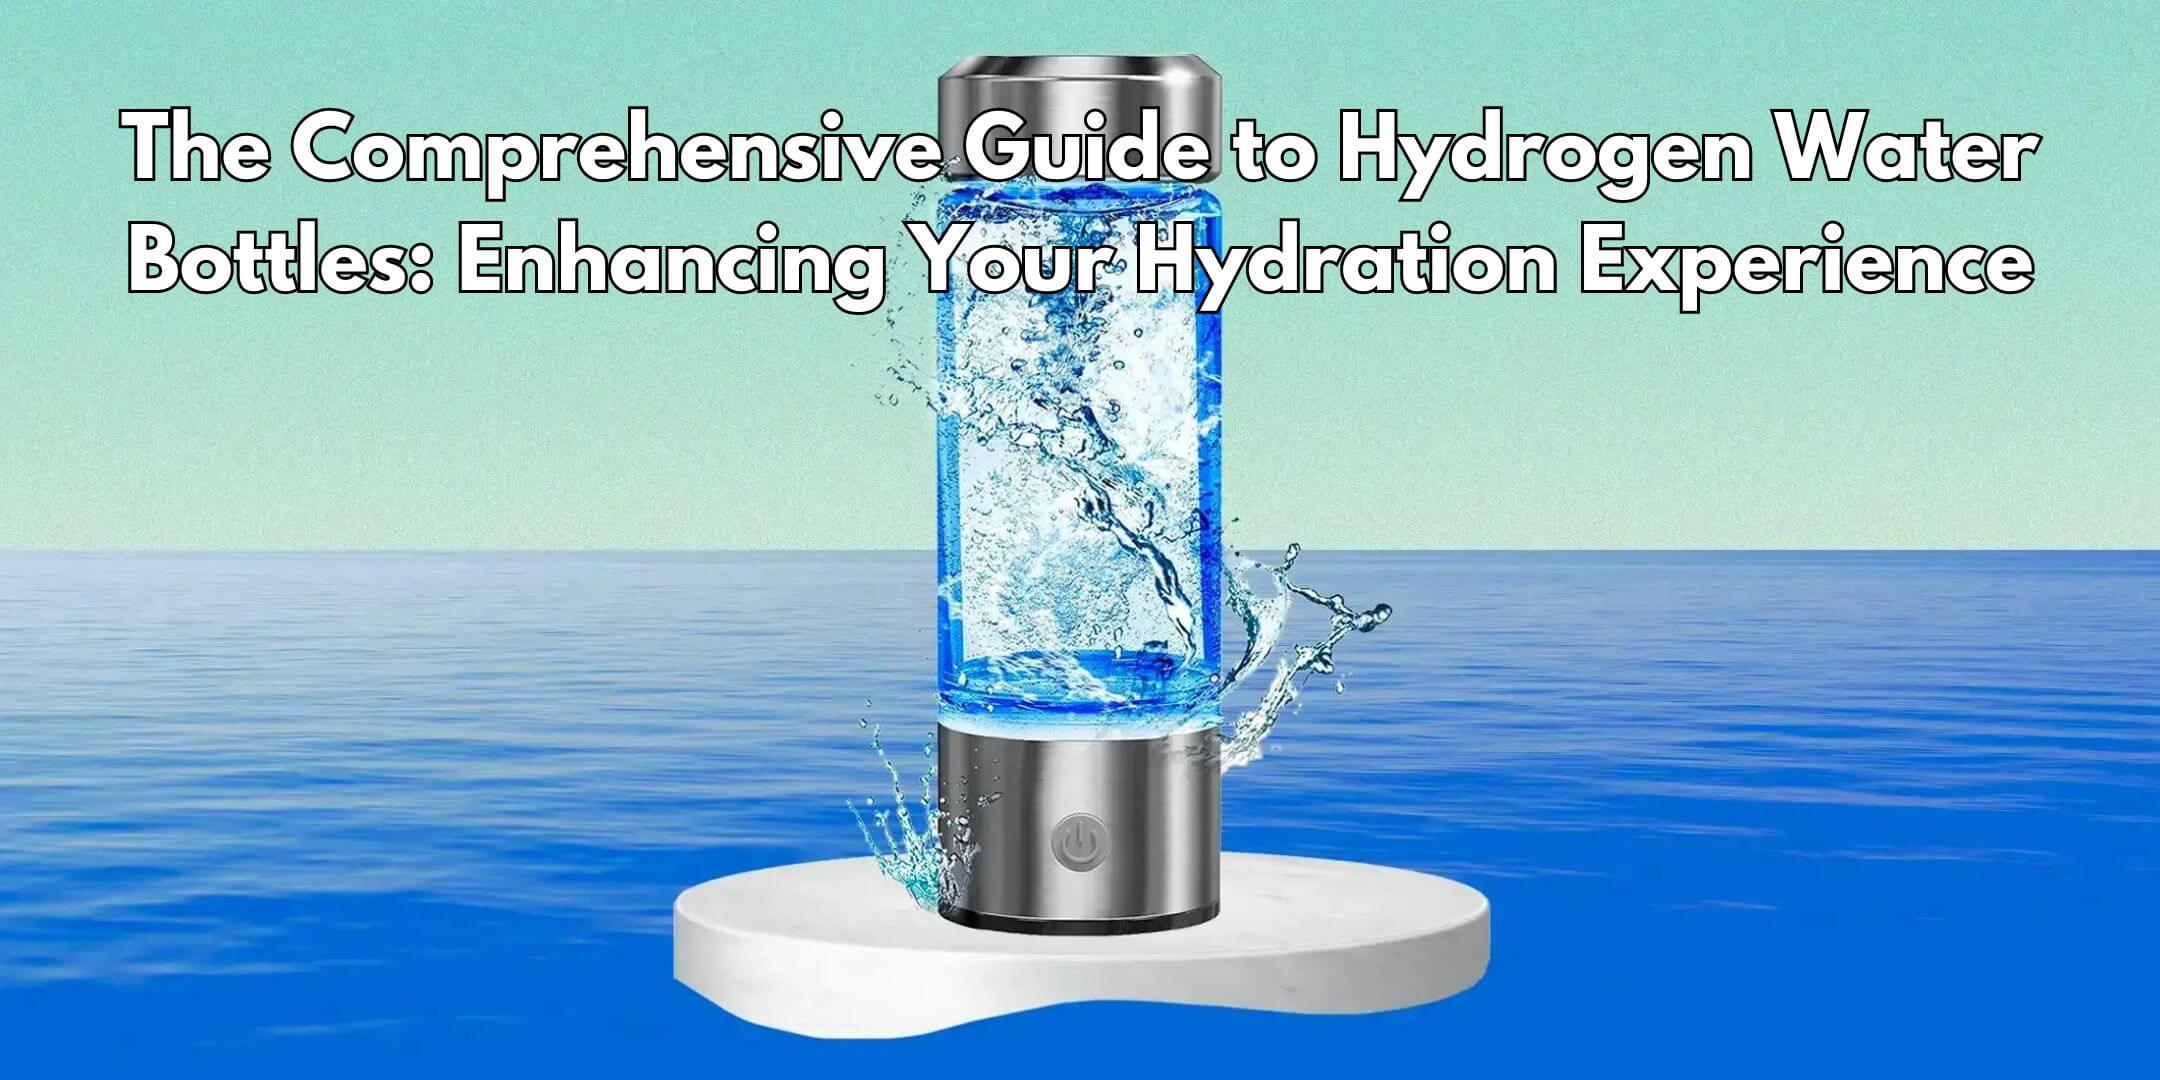 The Comprehensive Guide to Hydrogen Water Bottles: Enhancing Your Hydration Experience